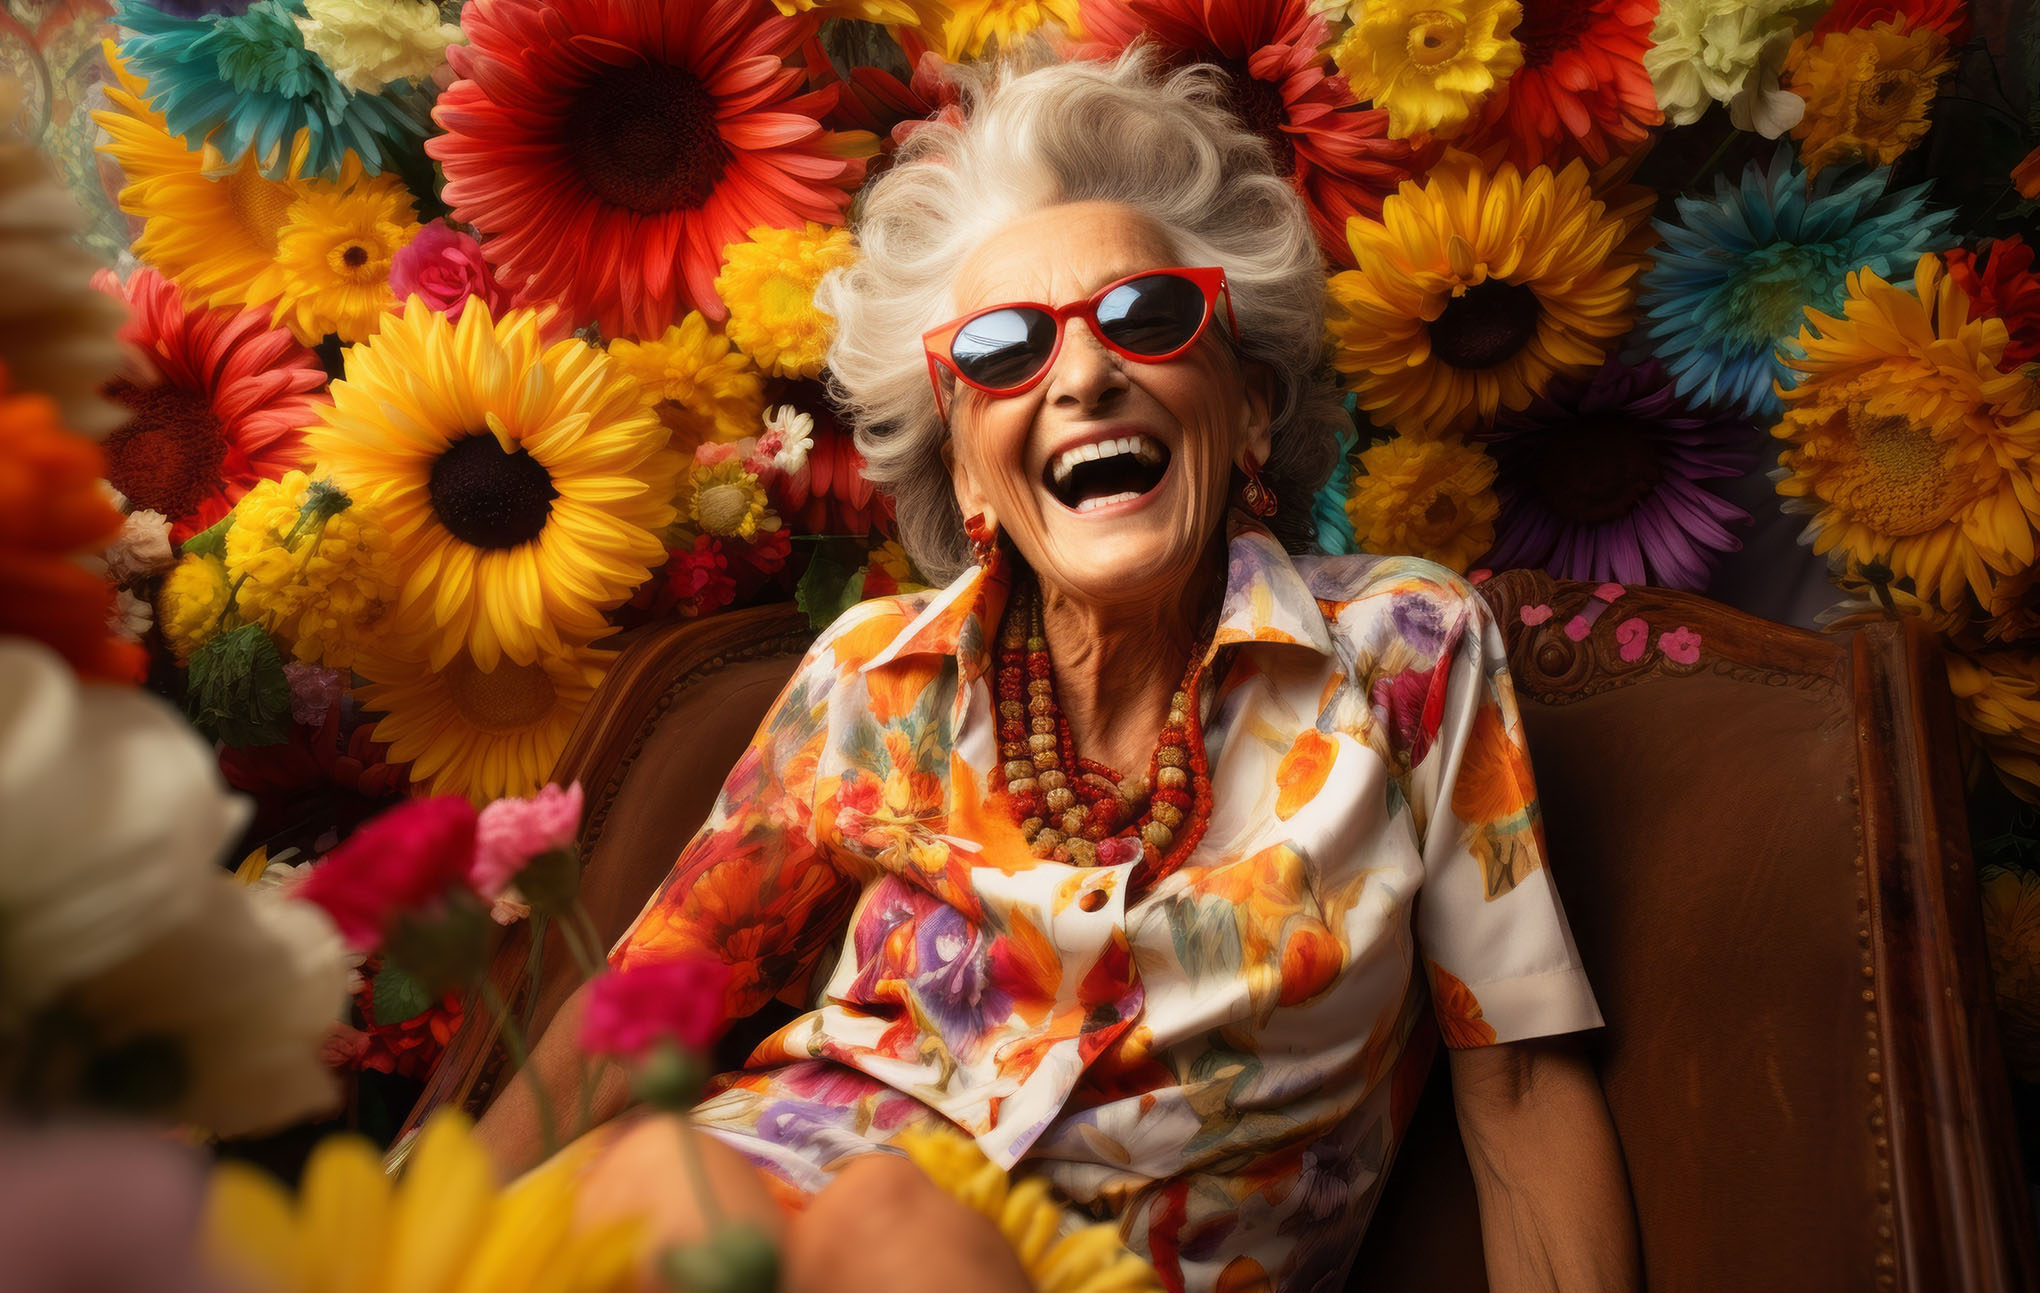 An elderly woman with wild gray hair laughs joyfully, sitting among multicolored flowers. she wears red sunglasses, a colorful floral shirt, and chunky necklaces, embodying a vibrant and lively spirit.